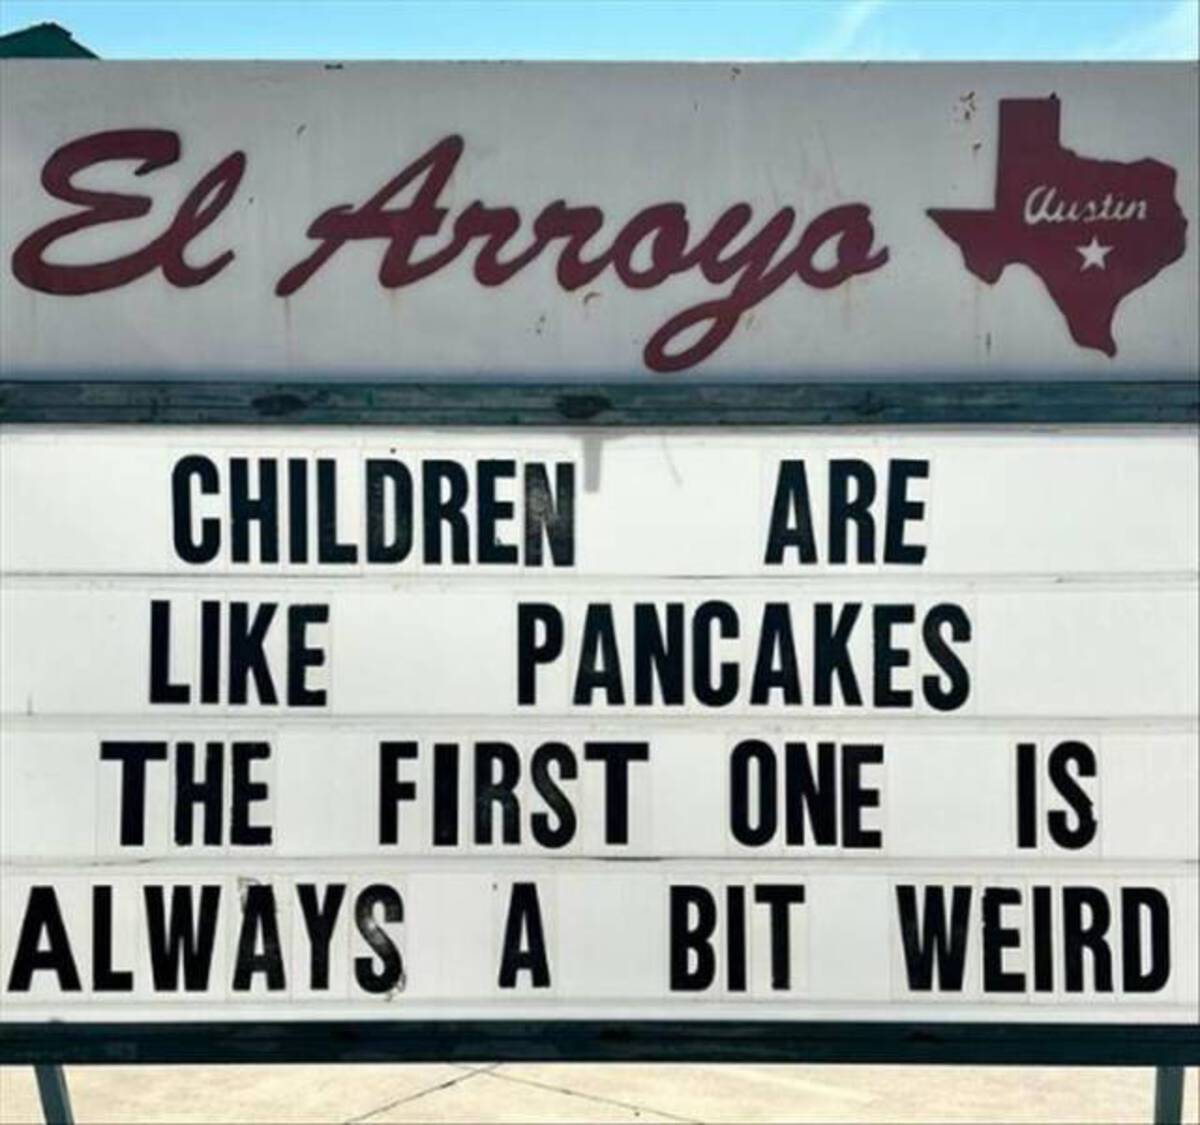 signage - El Arroyo Children Are Pancakes austin The First One Is Always A Bit Weird